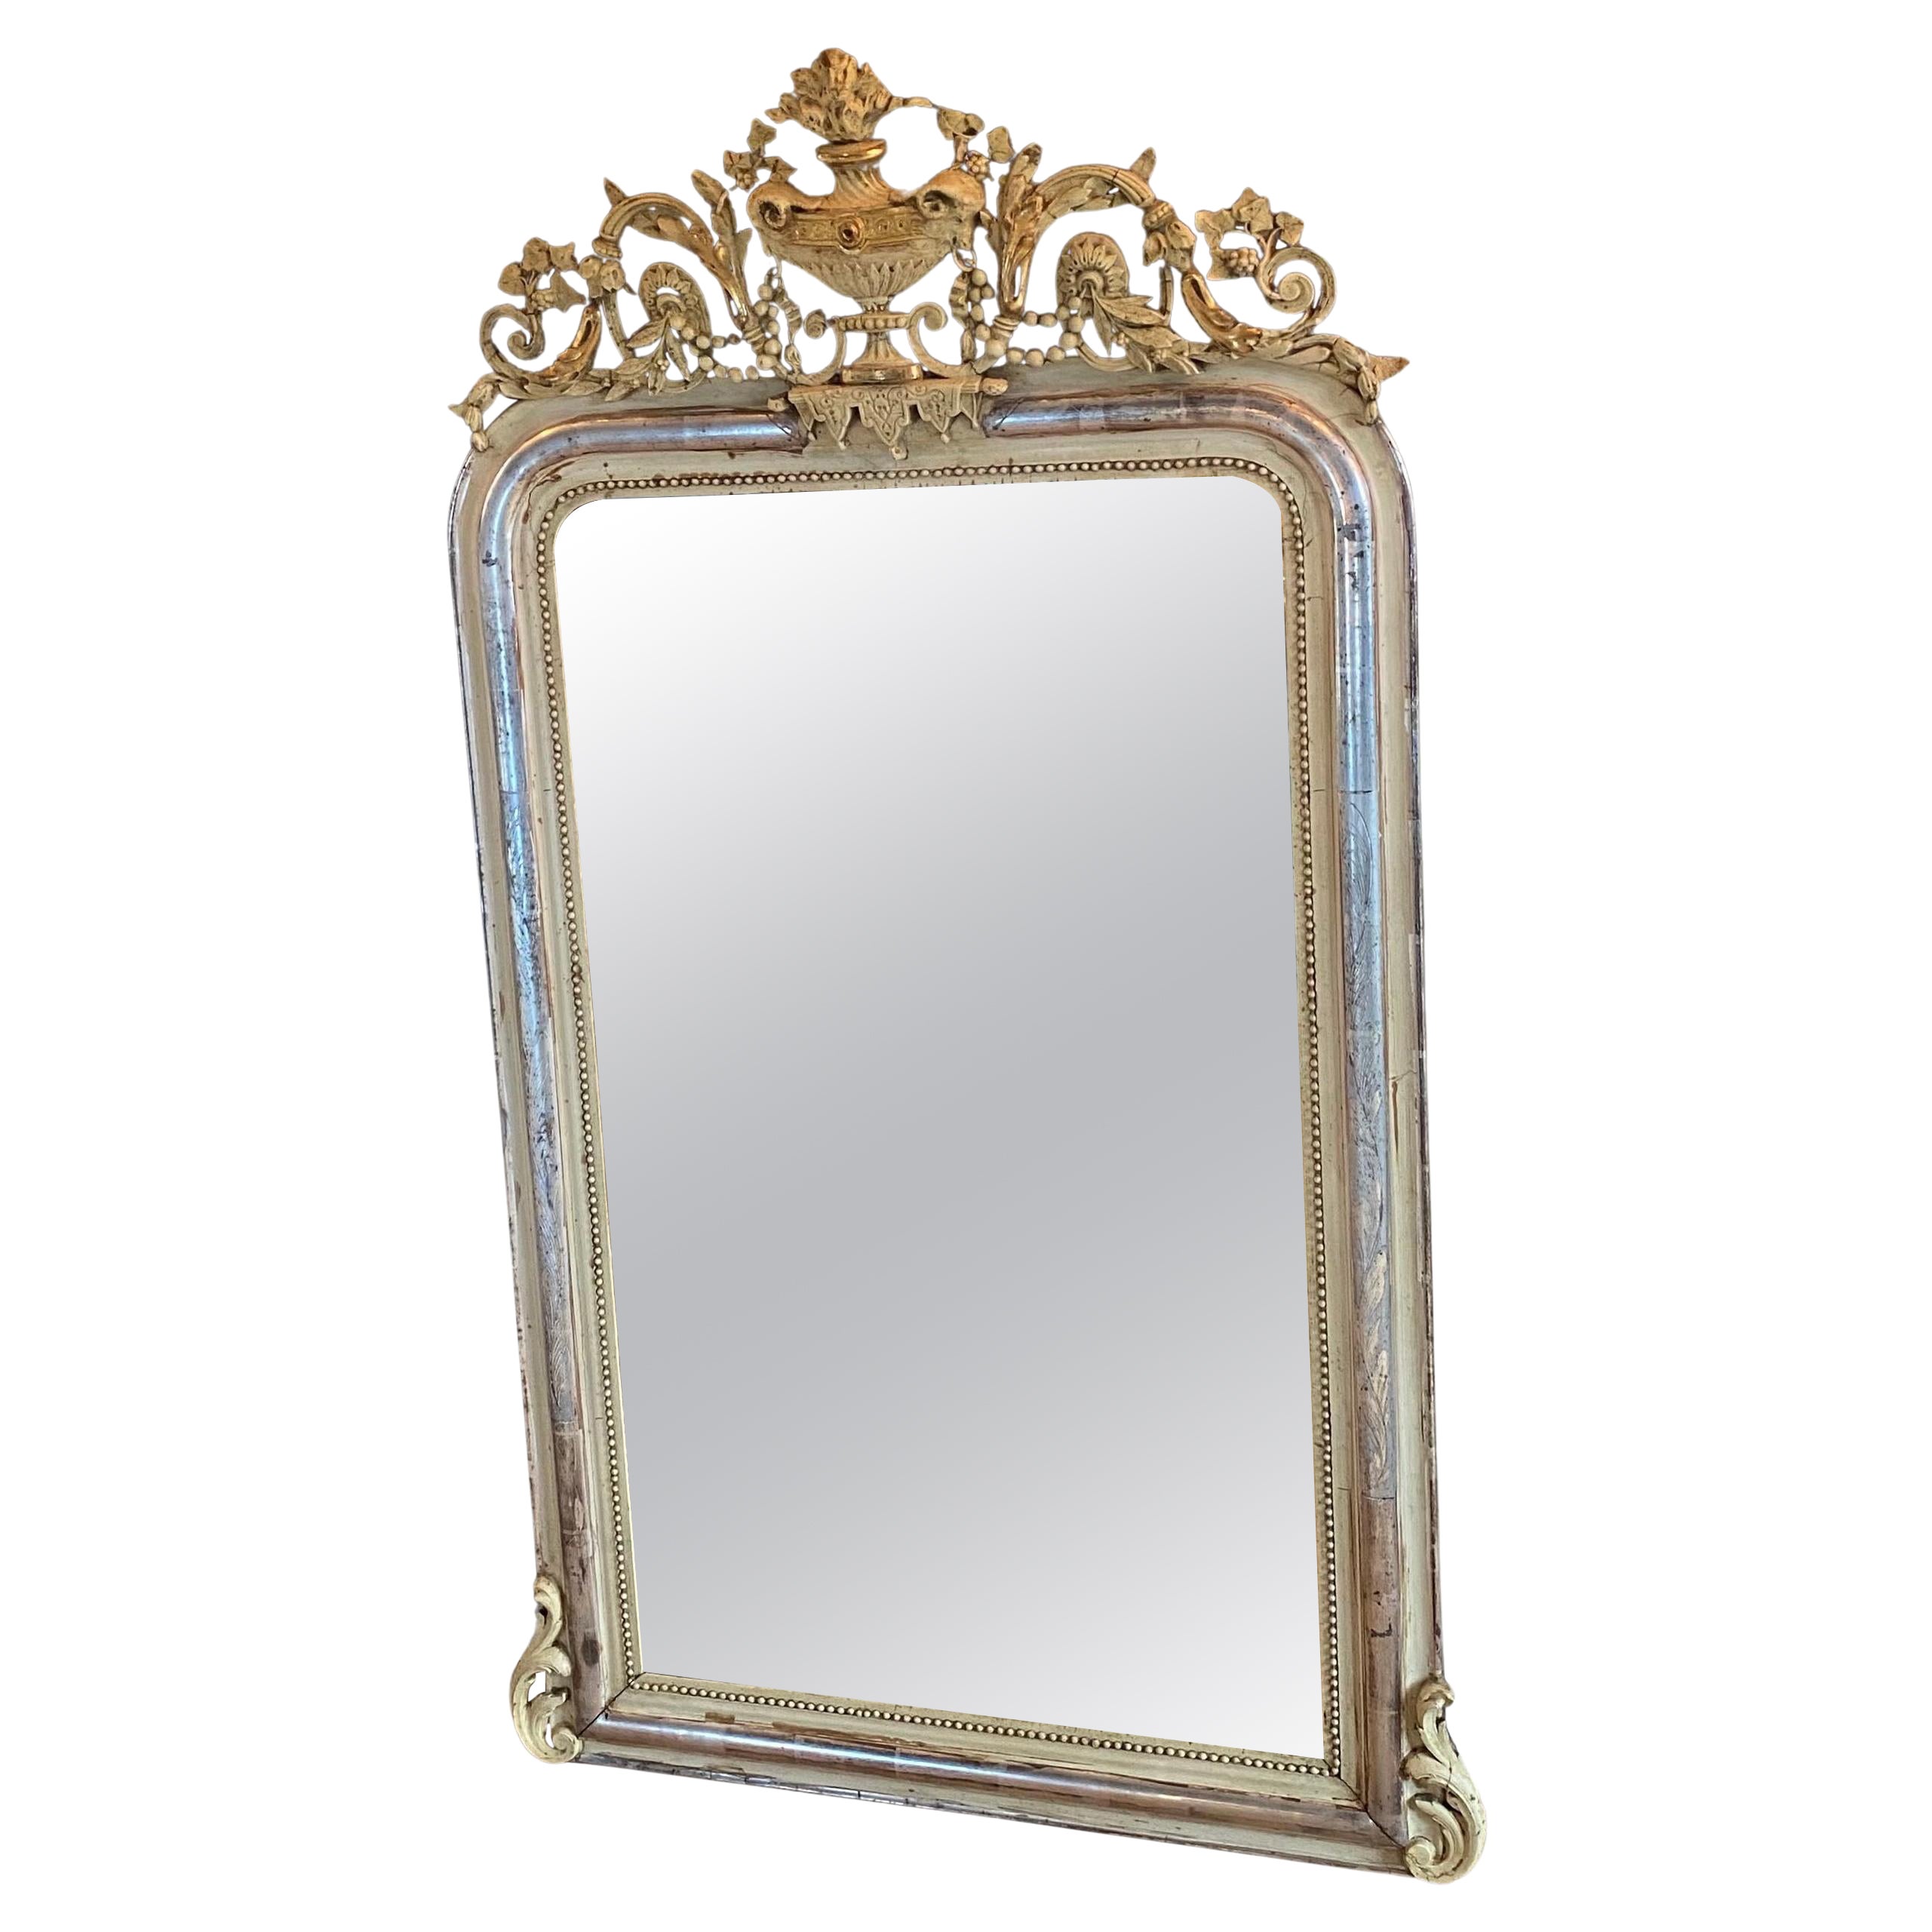 19th century silver leaf gilt French mirror with a crest For Sale